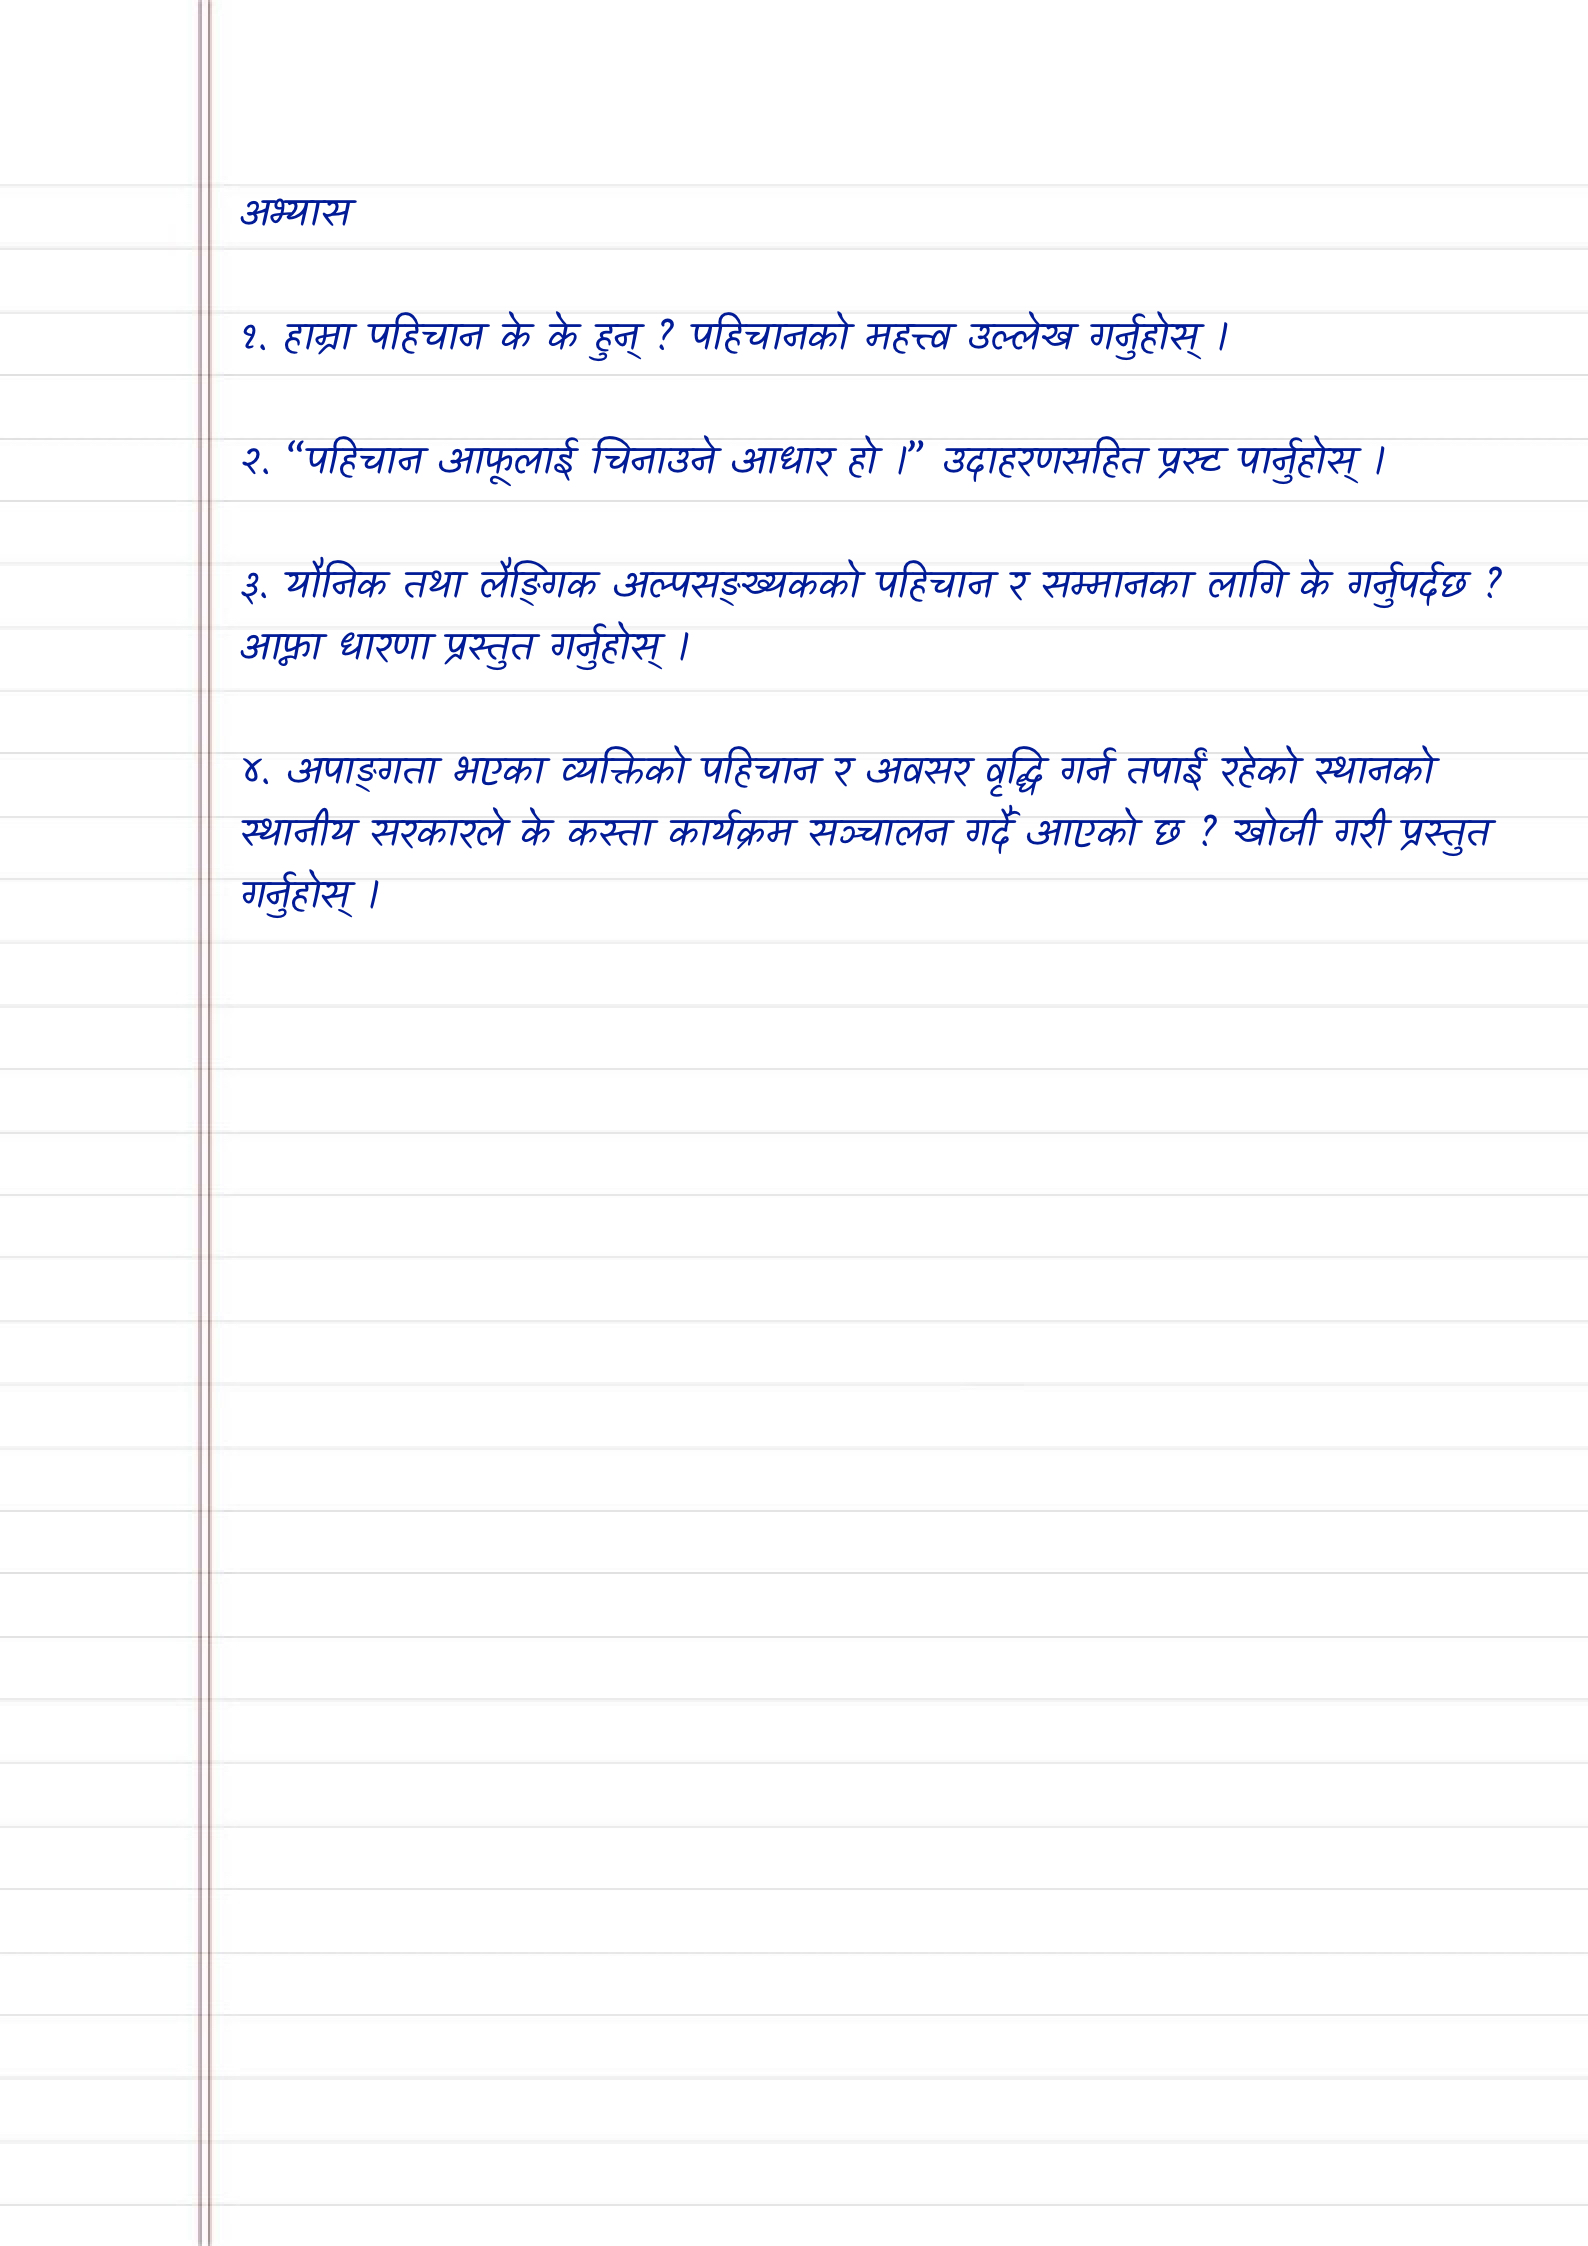 Class 10 Social unit 1 chapter 2 exercise